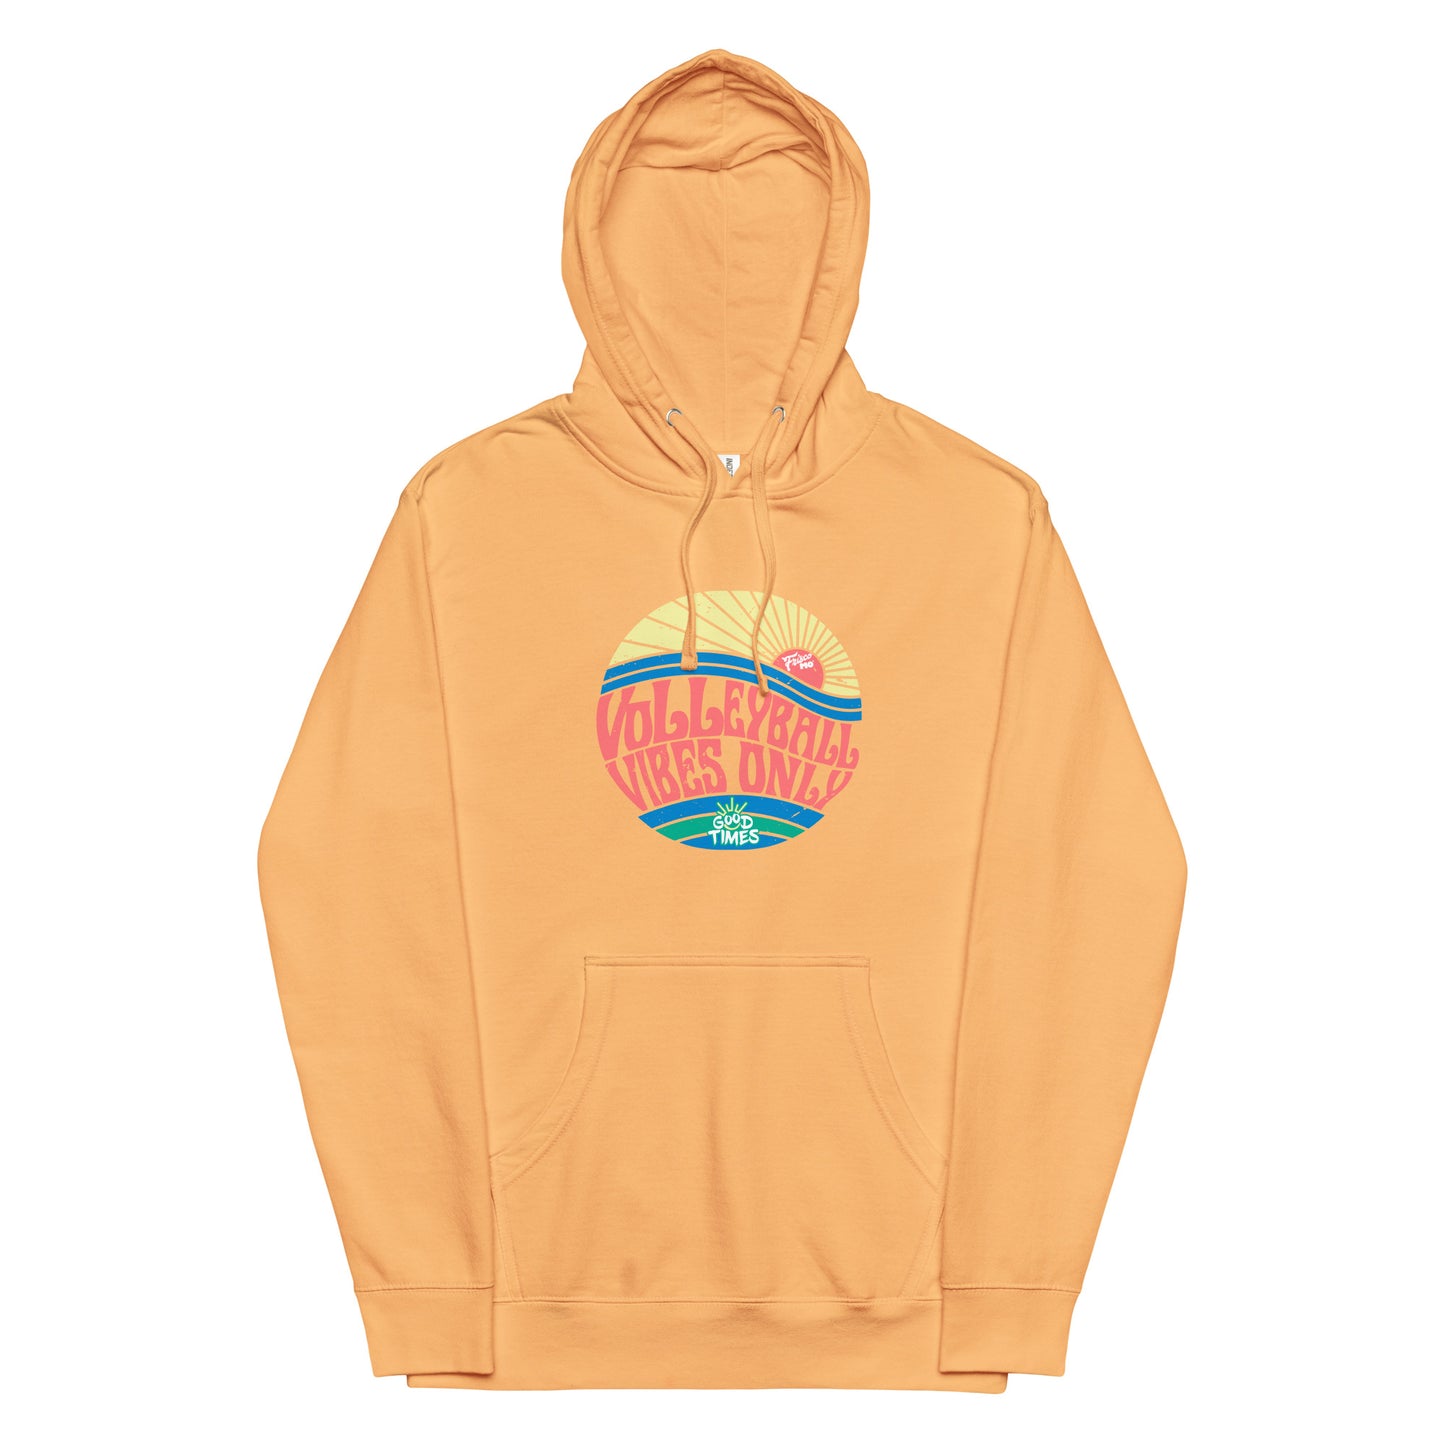 Good Times Volleyball Vibes Hoodie